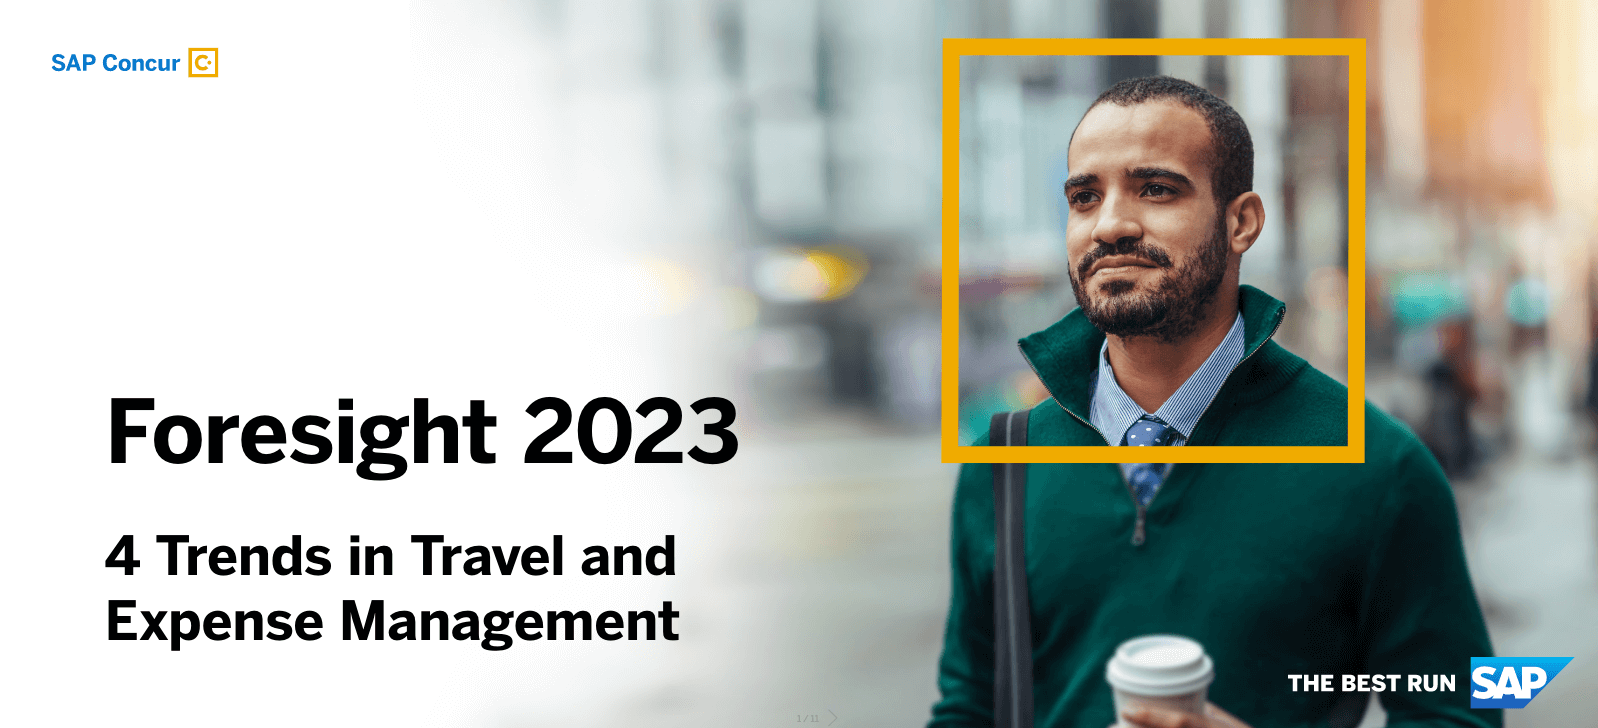 Foresight 2023: 4 Trends in Travel and Expense Management